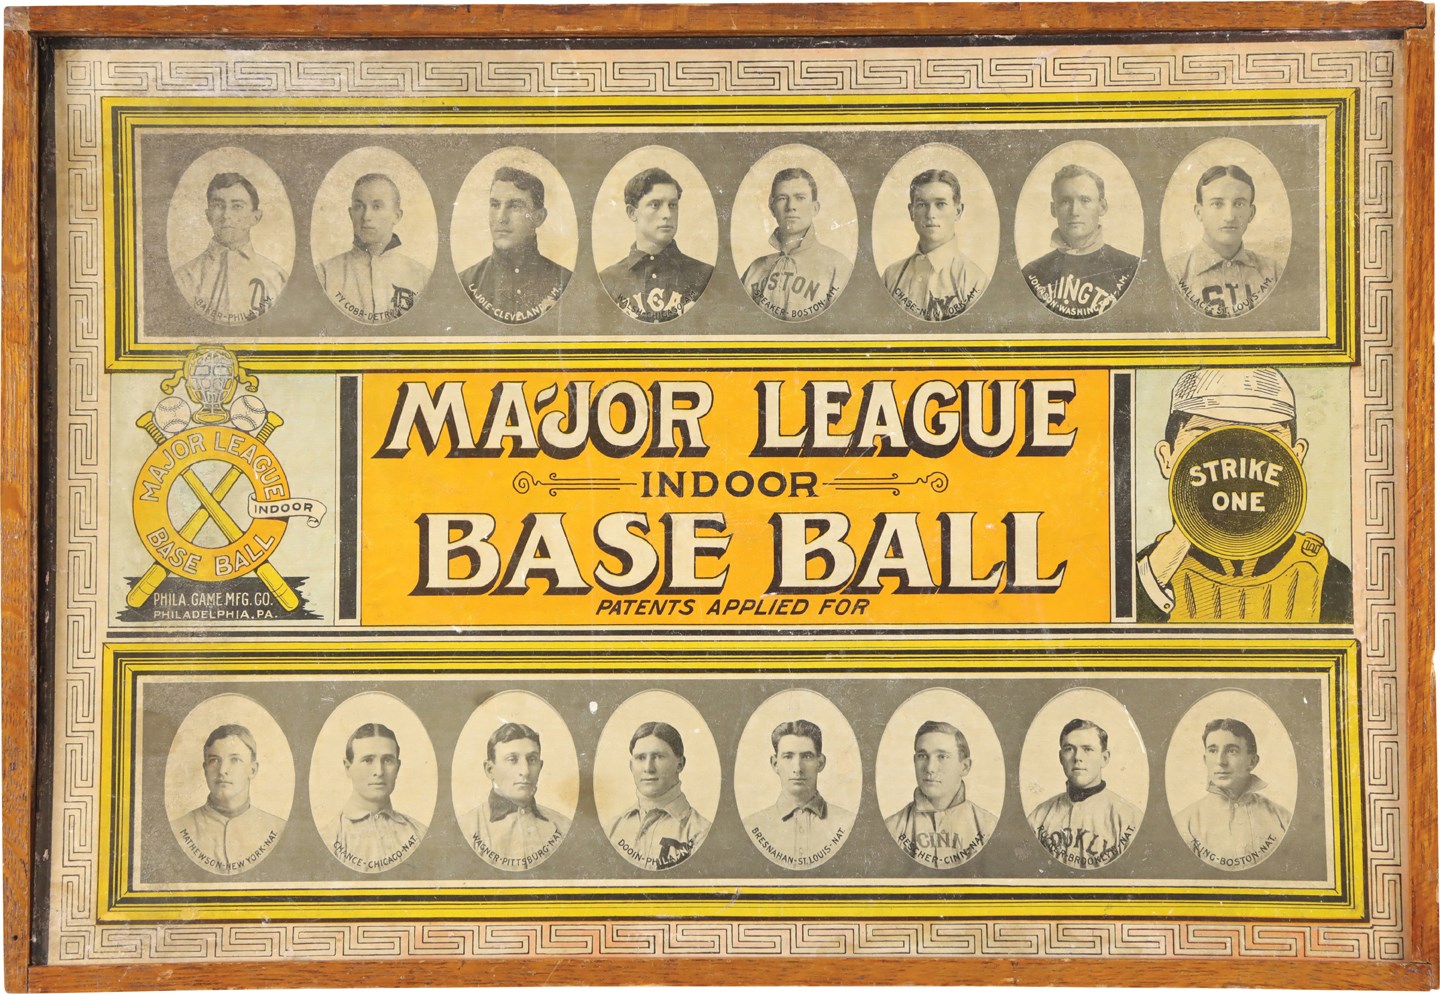 - Exceptional 1913 Major League Indoor Baseball Game w/Player Portraits on Cover